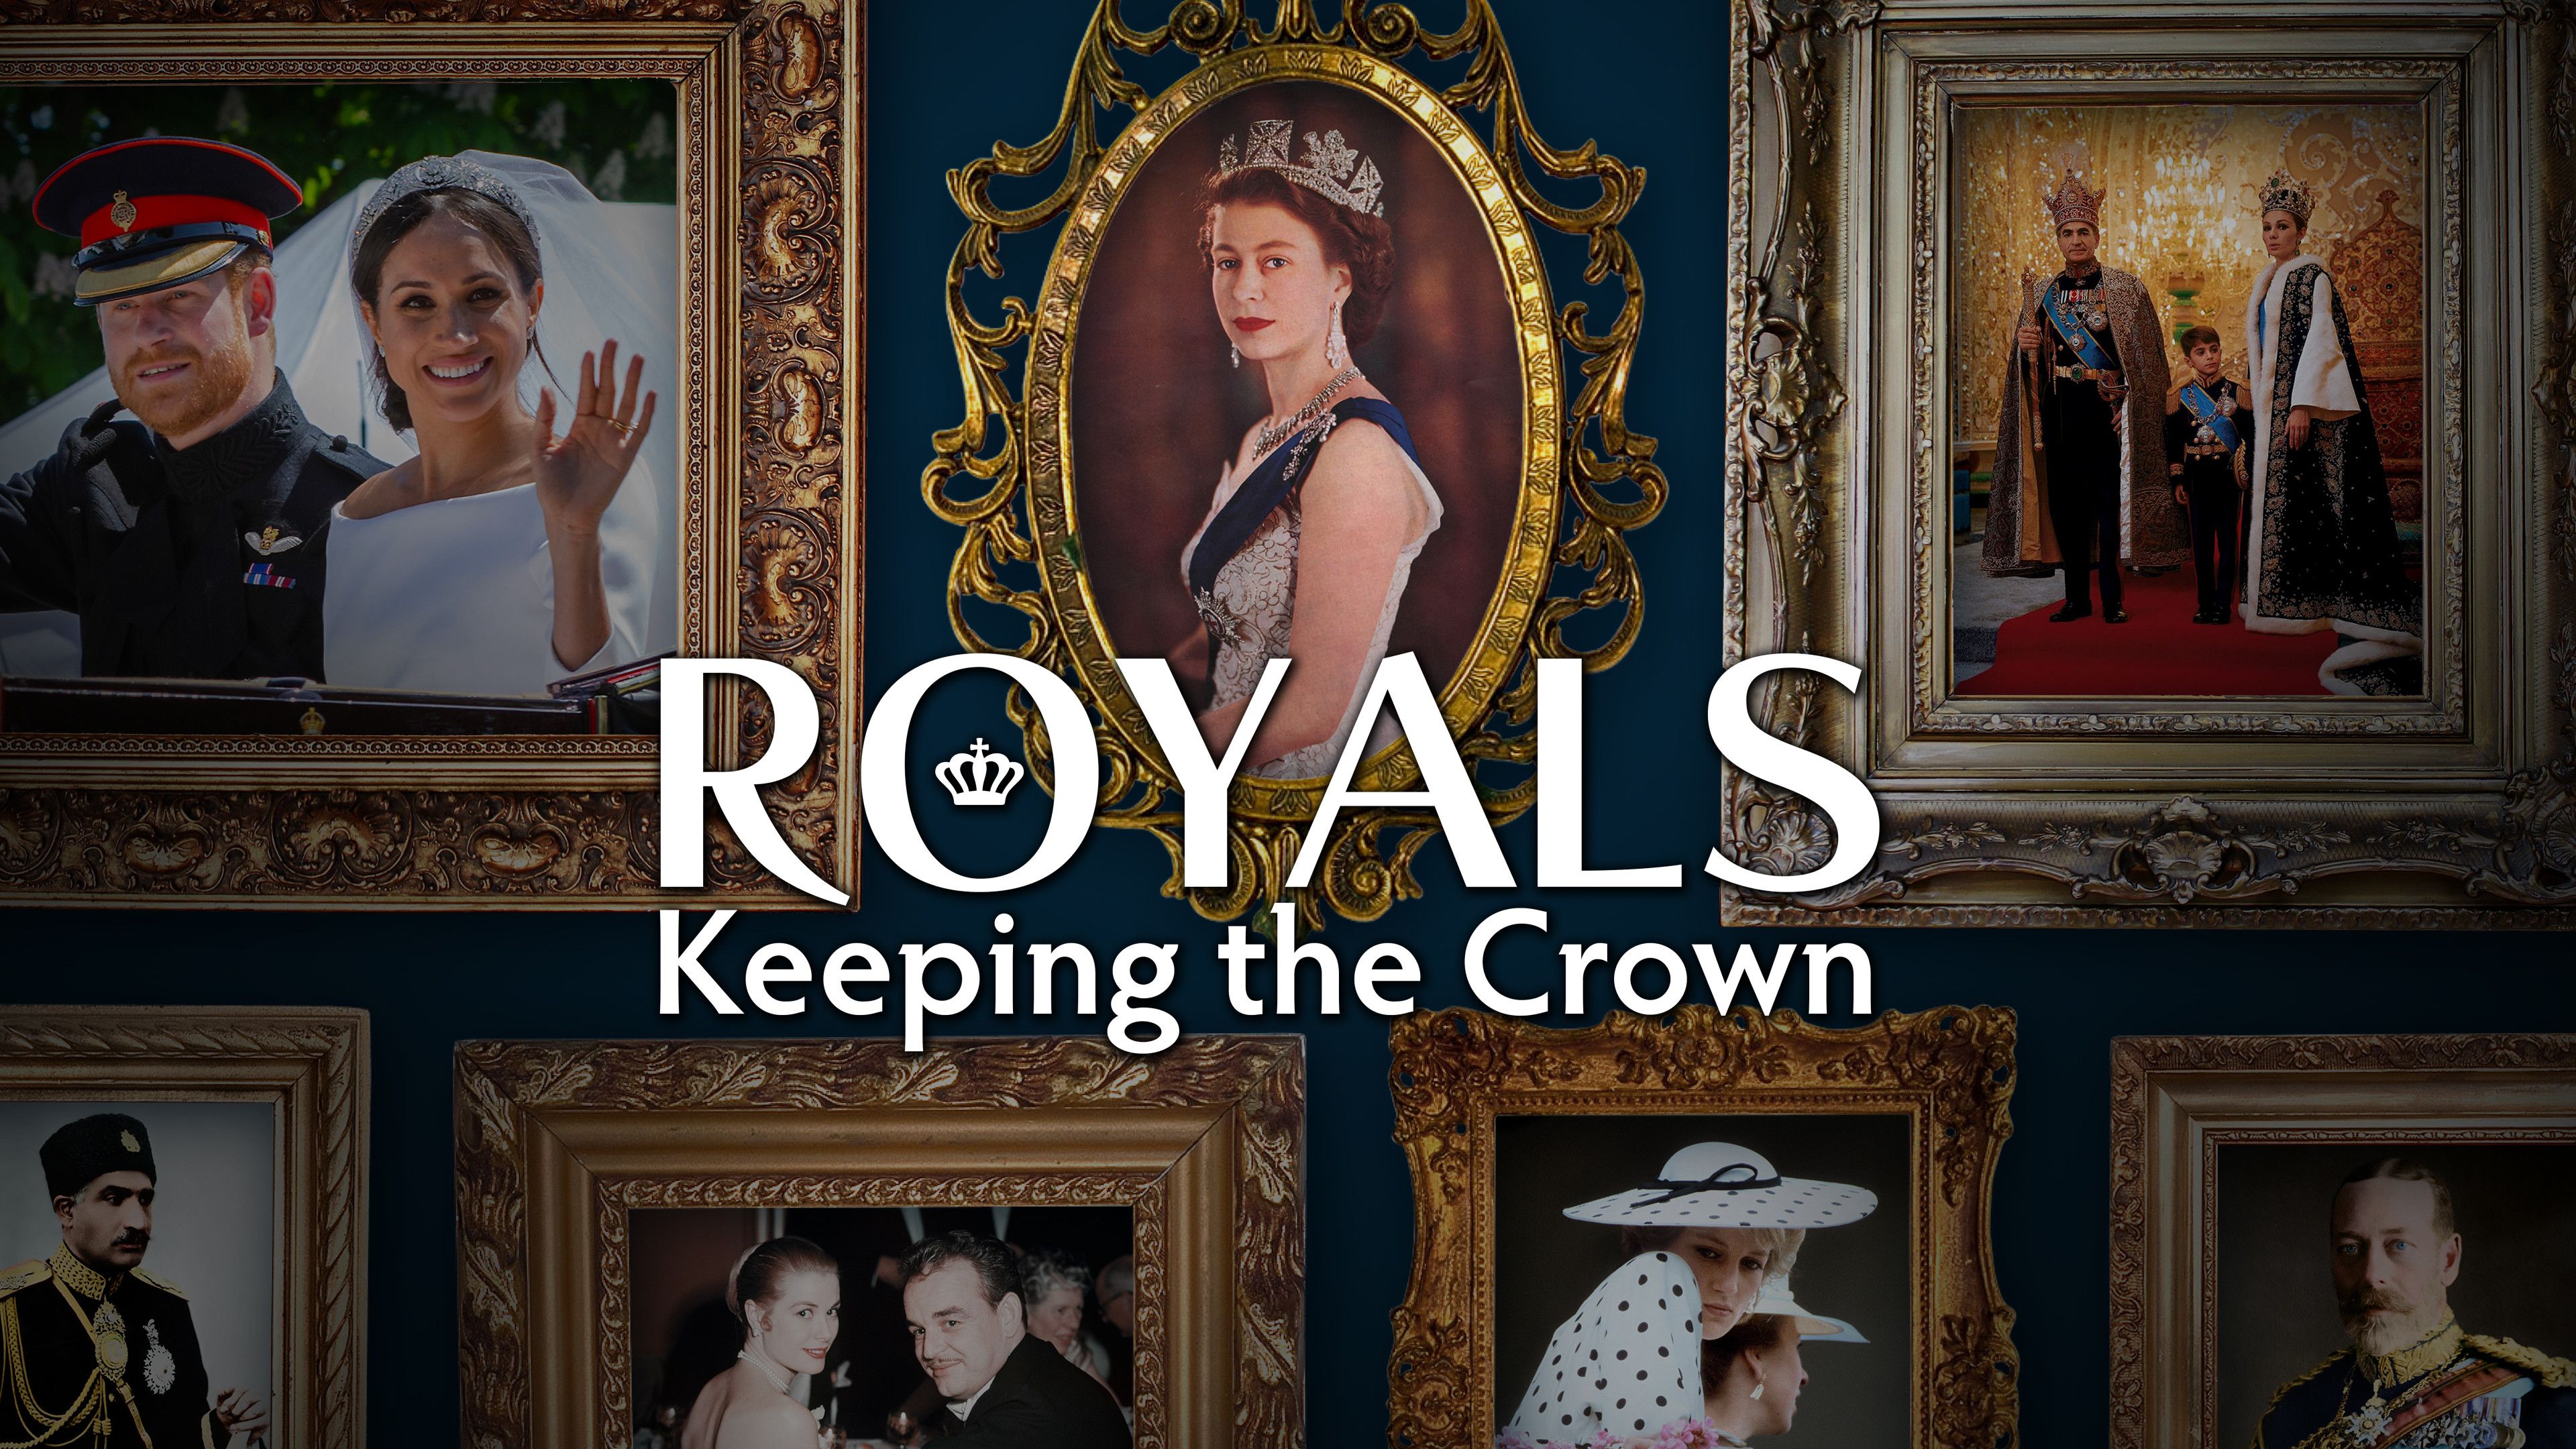 Royals: Keeping the Crown